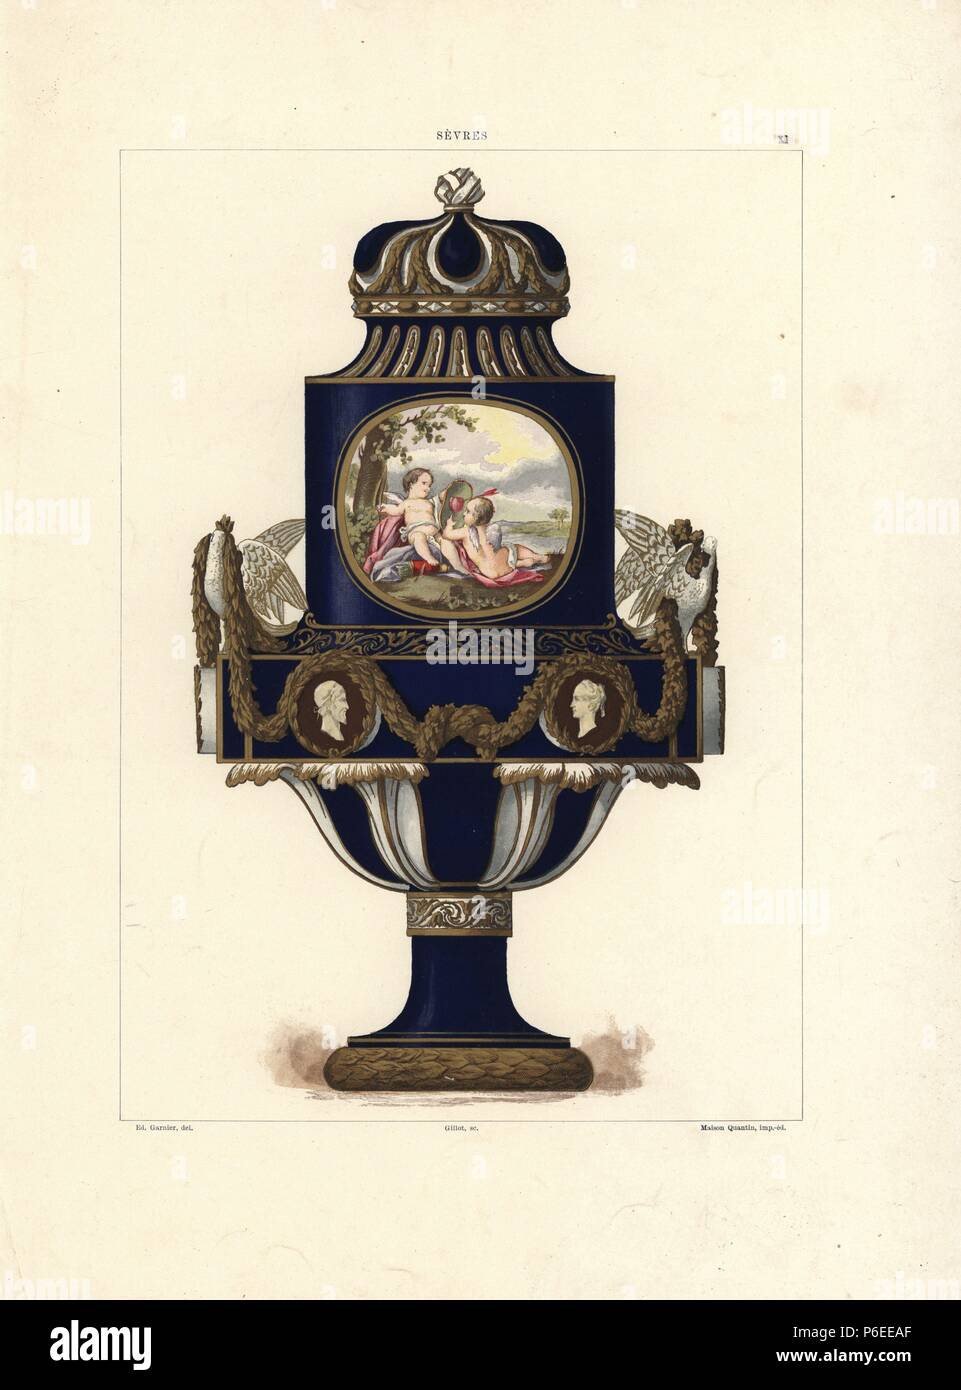 Aux Colombes vase by Sevres, neoclassical design with vignette of two cupids playing. From the collection of Baron Alphonse de Rothschild. Chromolithograph by Gillot of an illustration by Edouard Garnier from The Soft Paste Porcelain of Sevres, Maison Quantin, Paris, 1891. Stock Photo